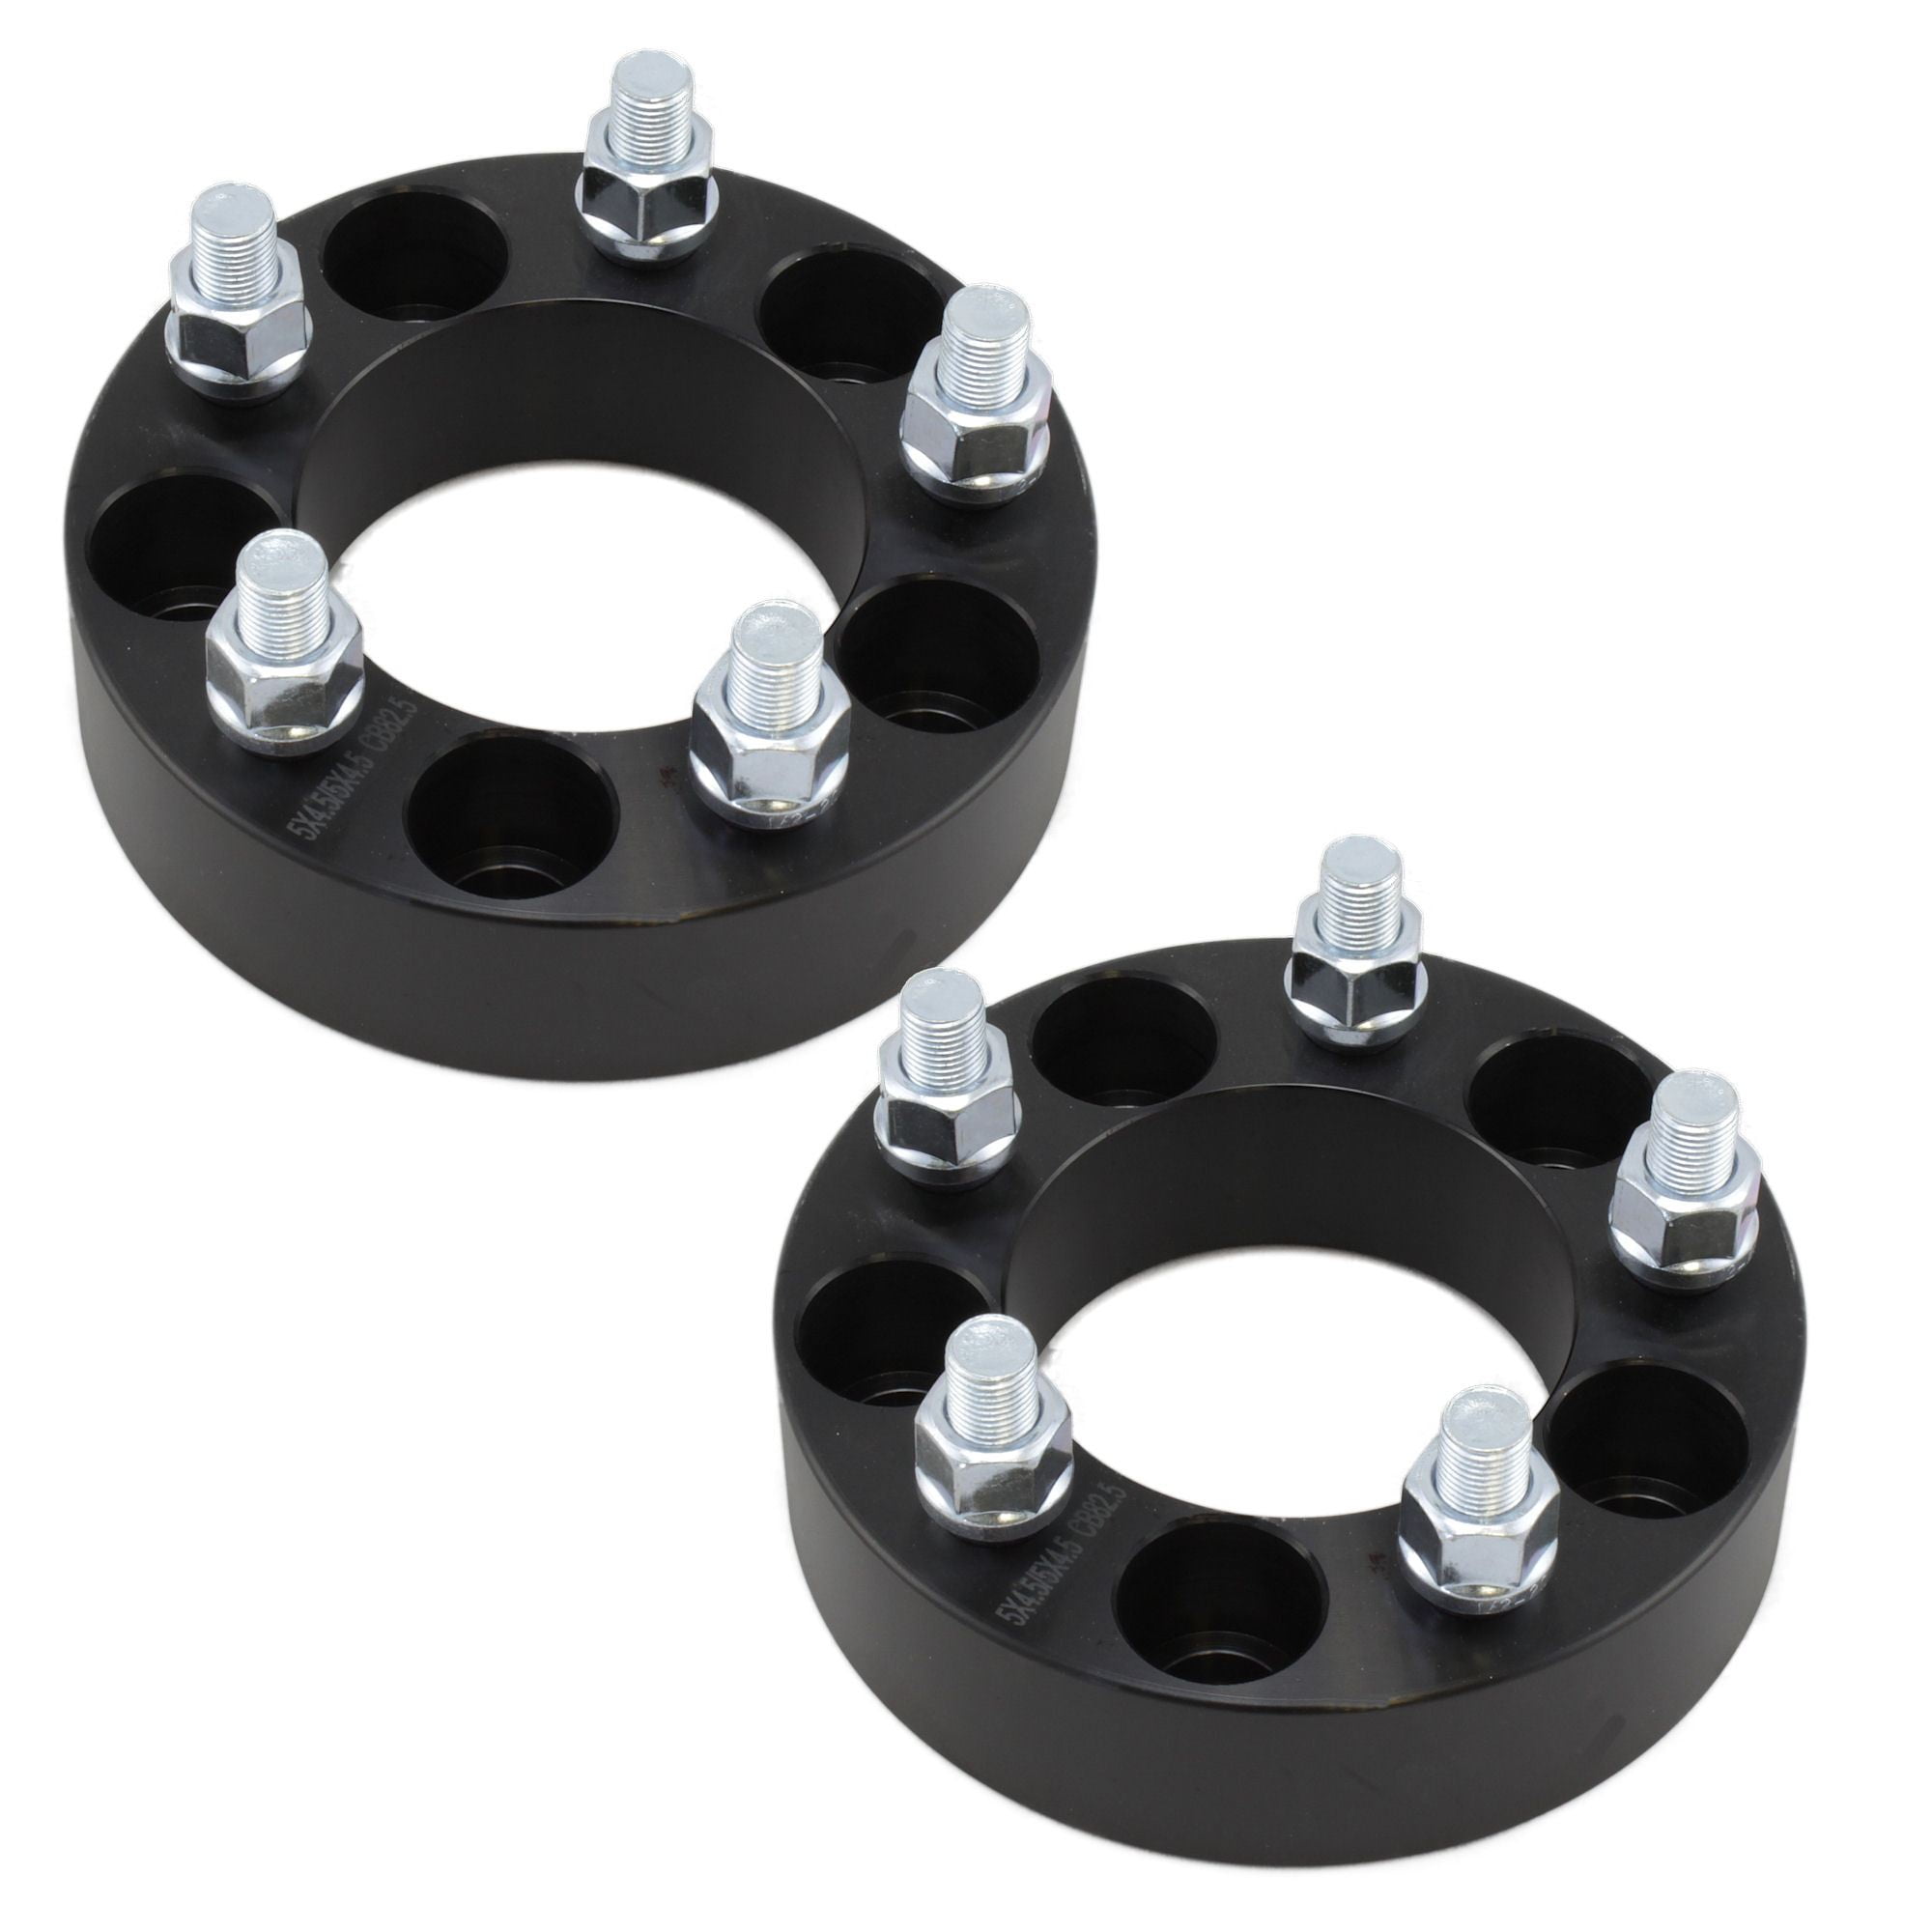 4X black wheel spacers 5x4.5 1/2" studs 1.5" thick for Ford Mustang Edge Ranger 